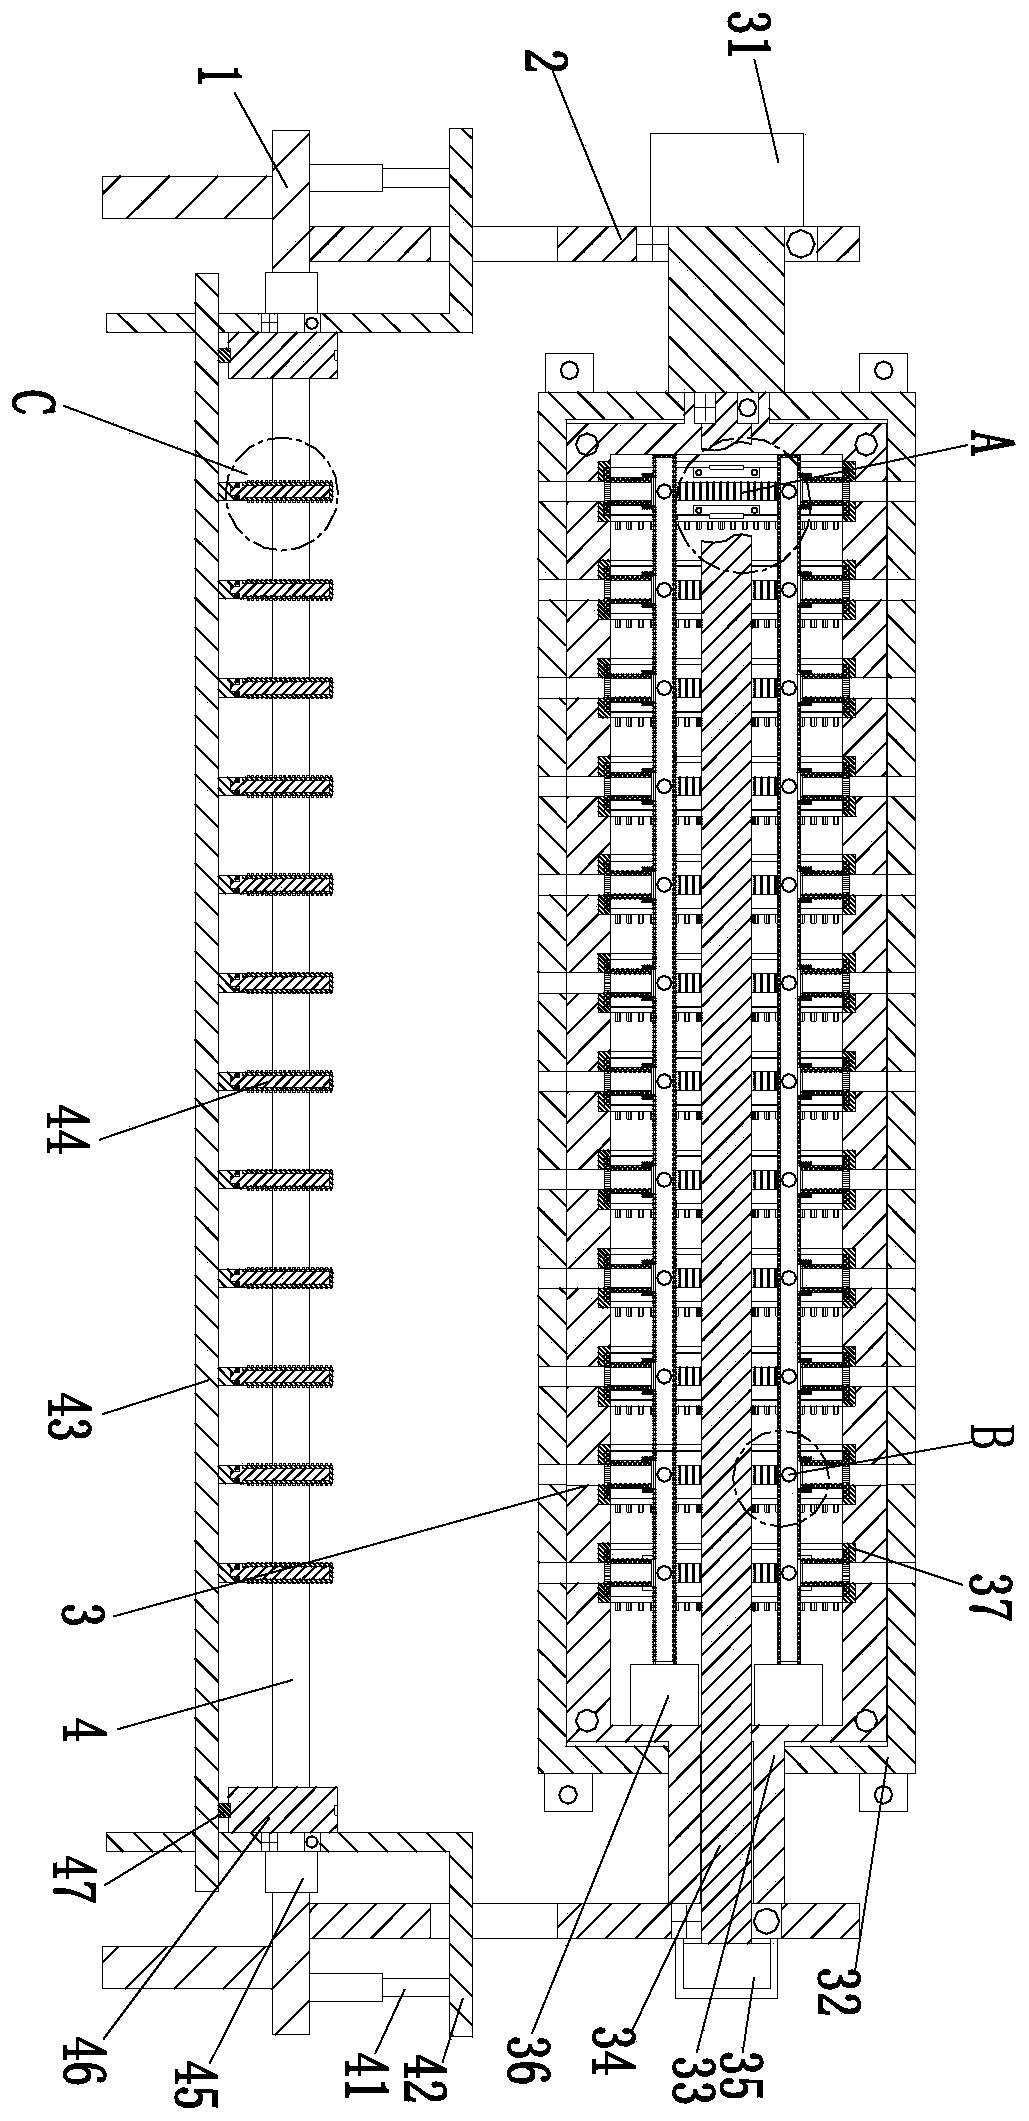 Non-woven fabric melt-blowing forming method